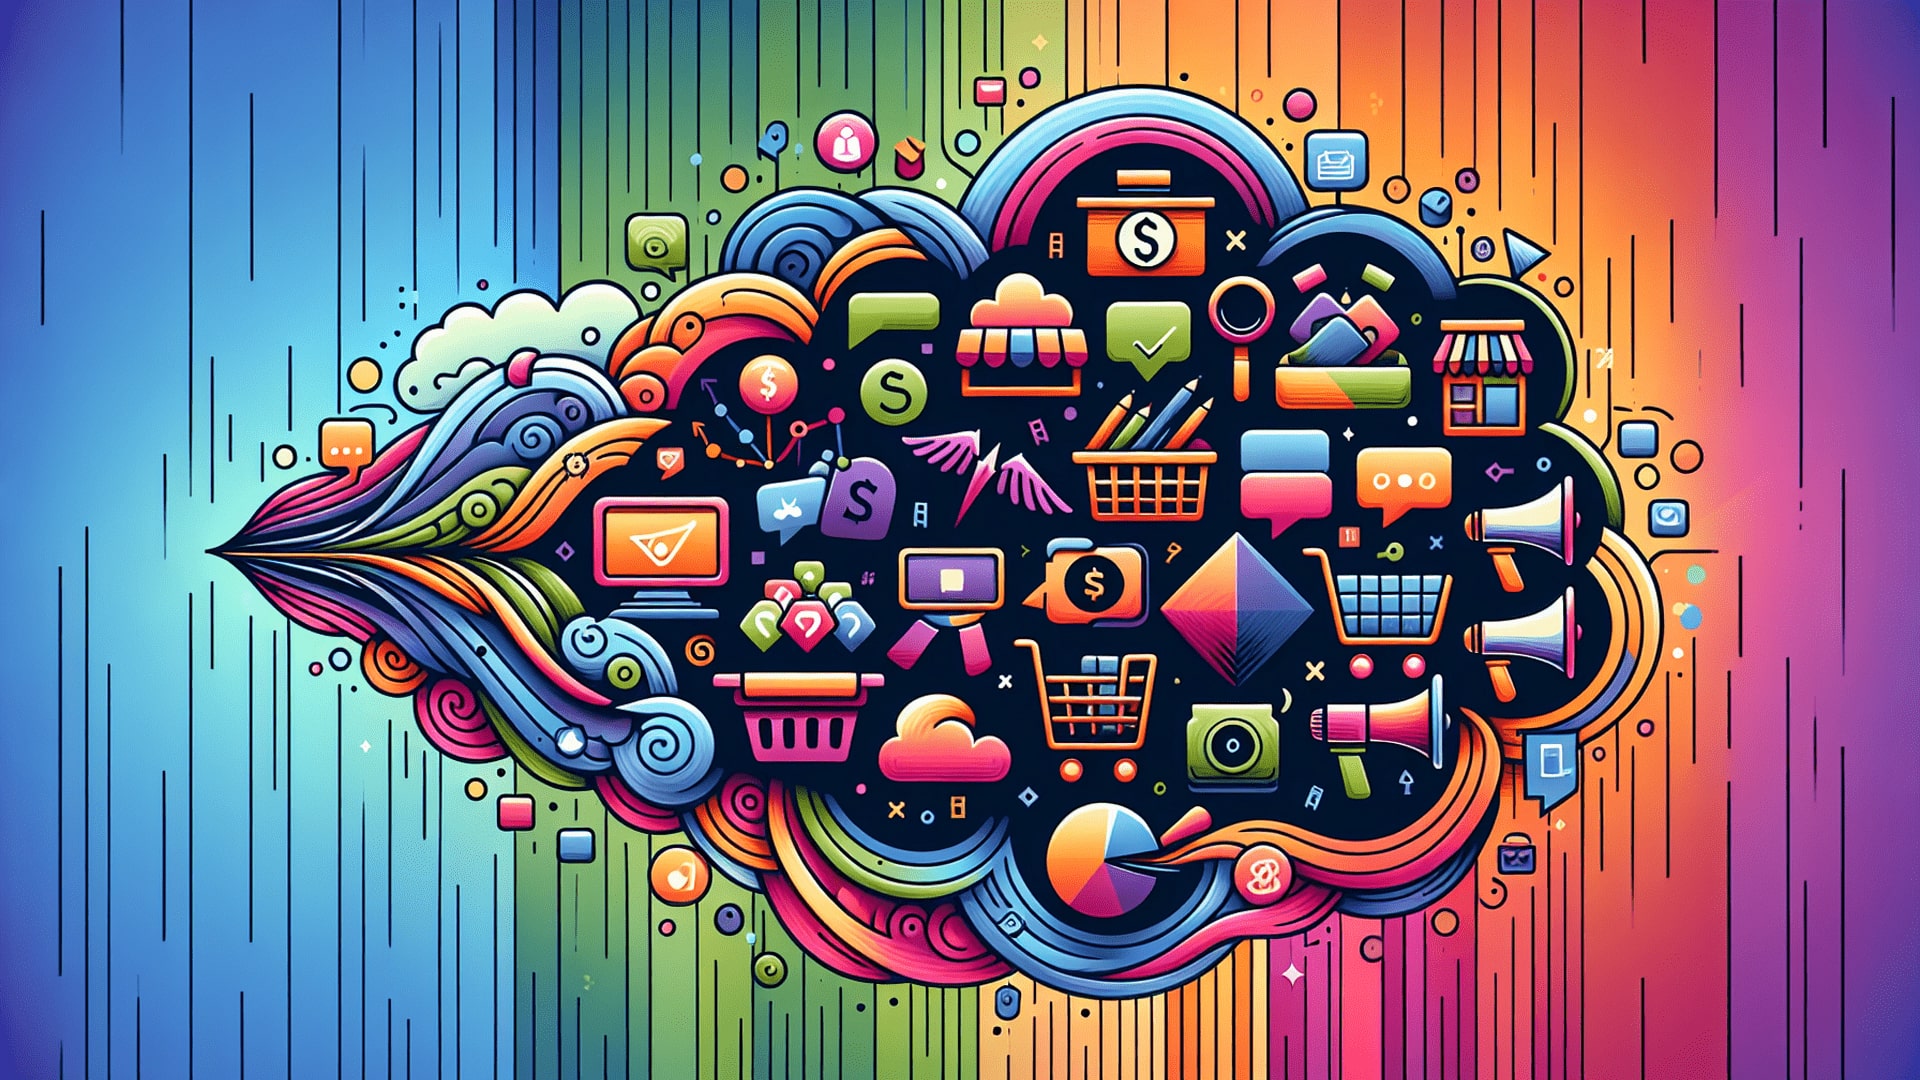 Creative illustration of Shopify apps